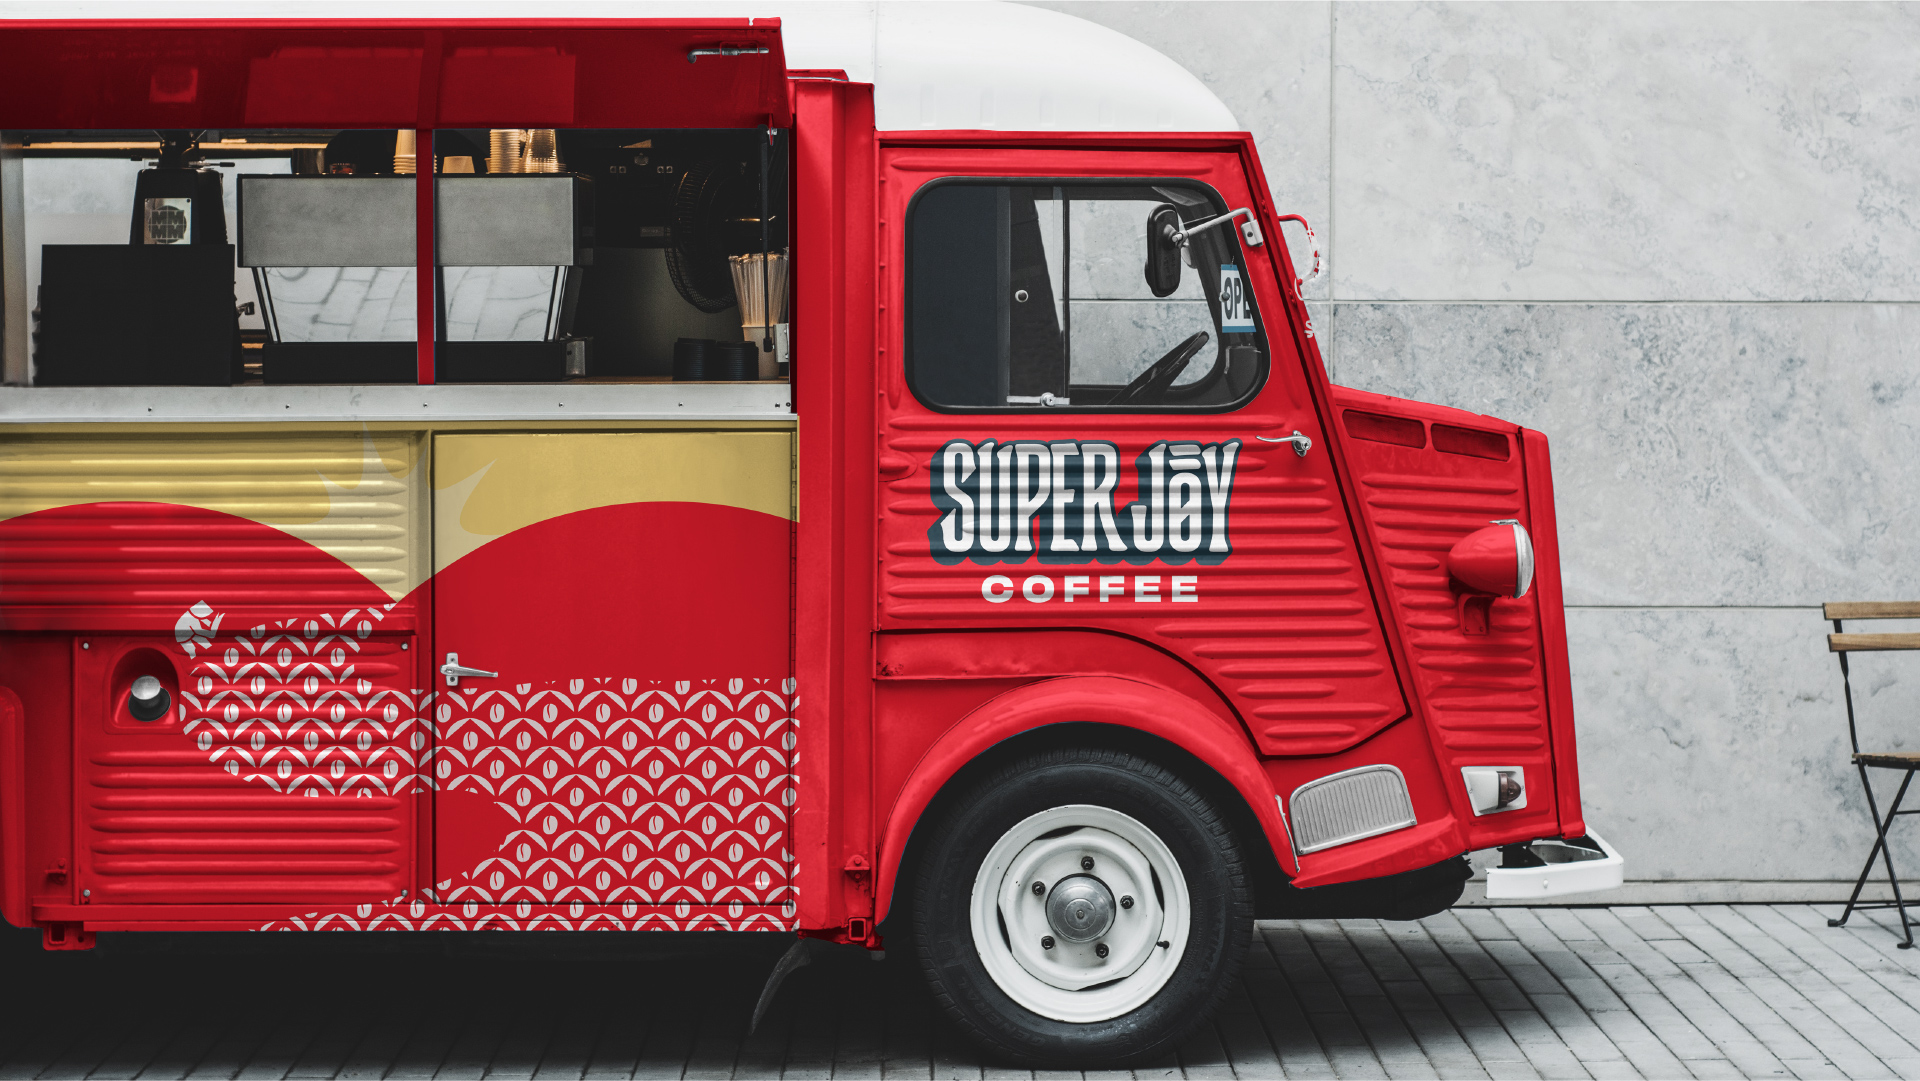 A Super Joy mobile cafe is a striking red truck with the logo on the passenger door. The side panel shows rolling hills with a yellow rising sun. There are illustrated beans among the hills.